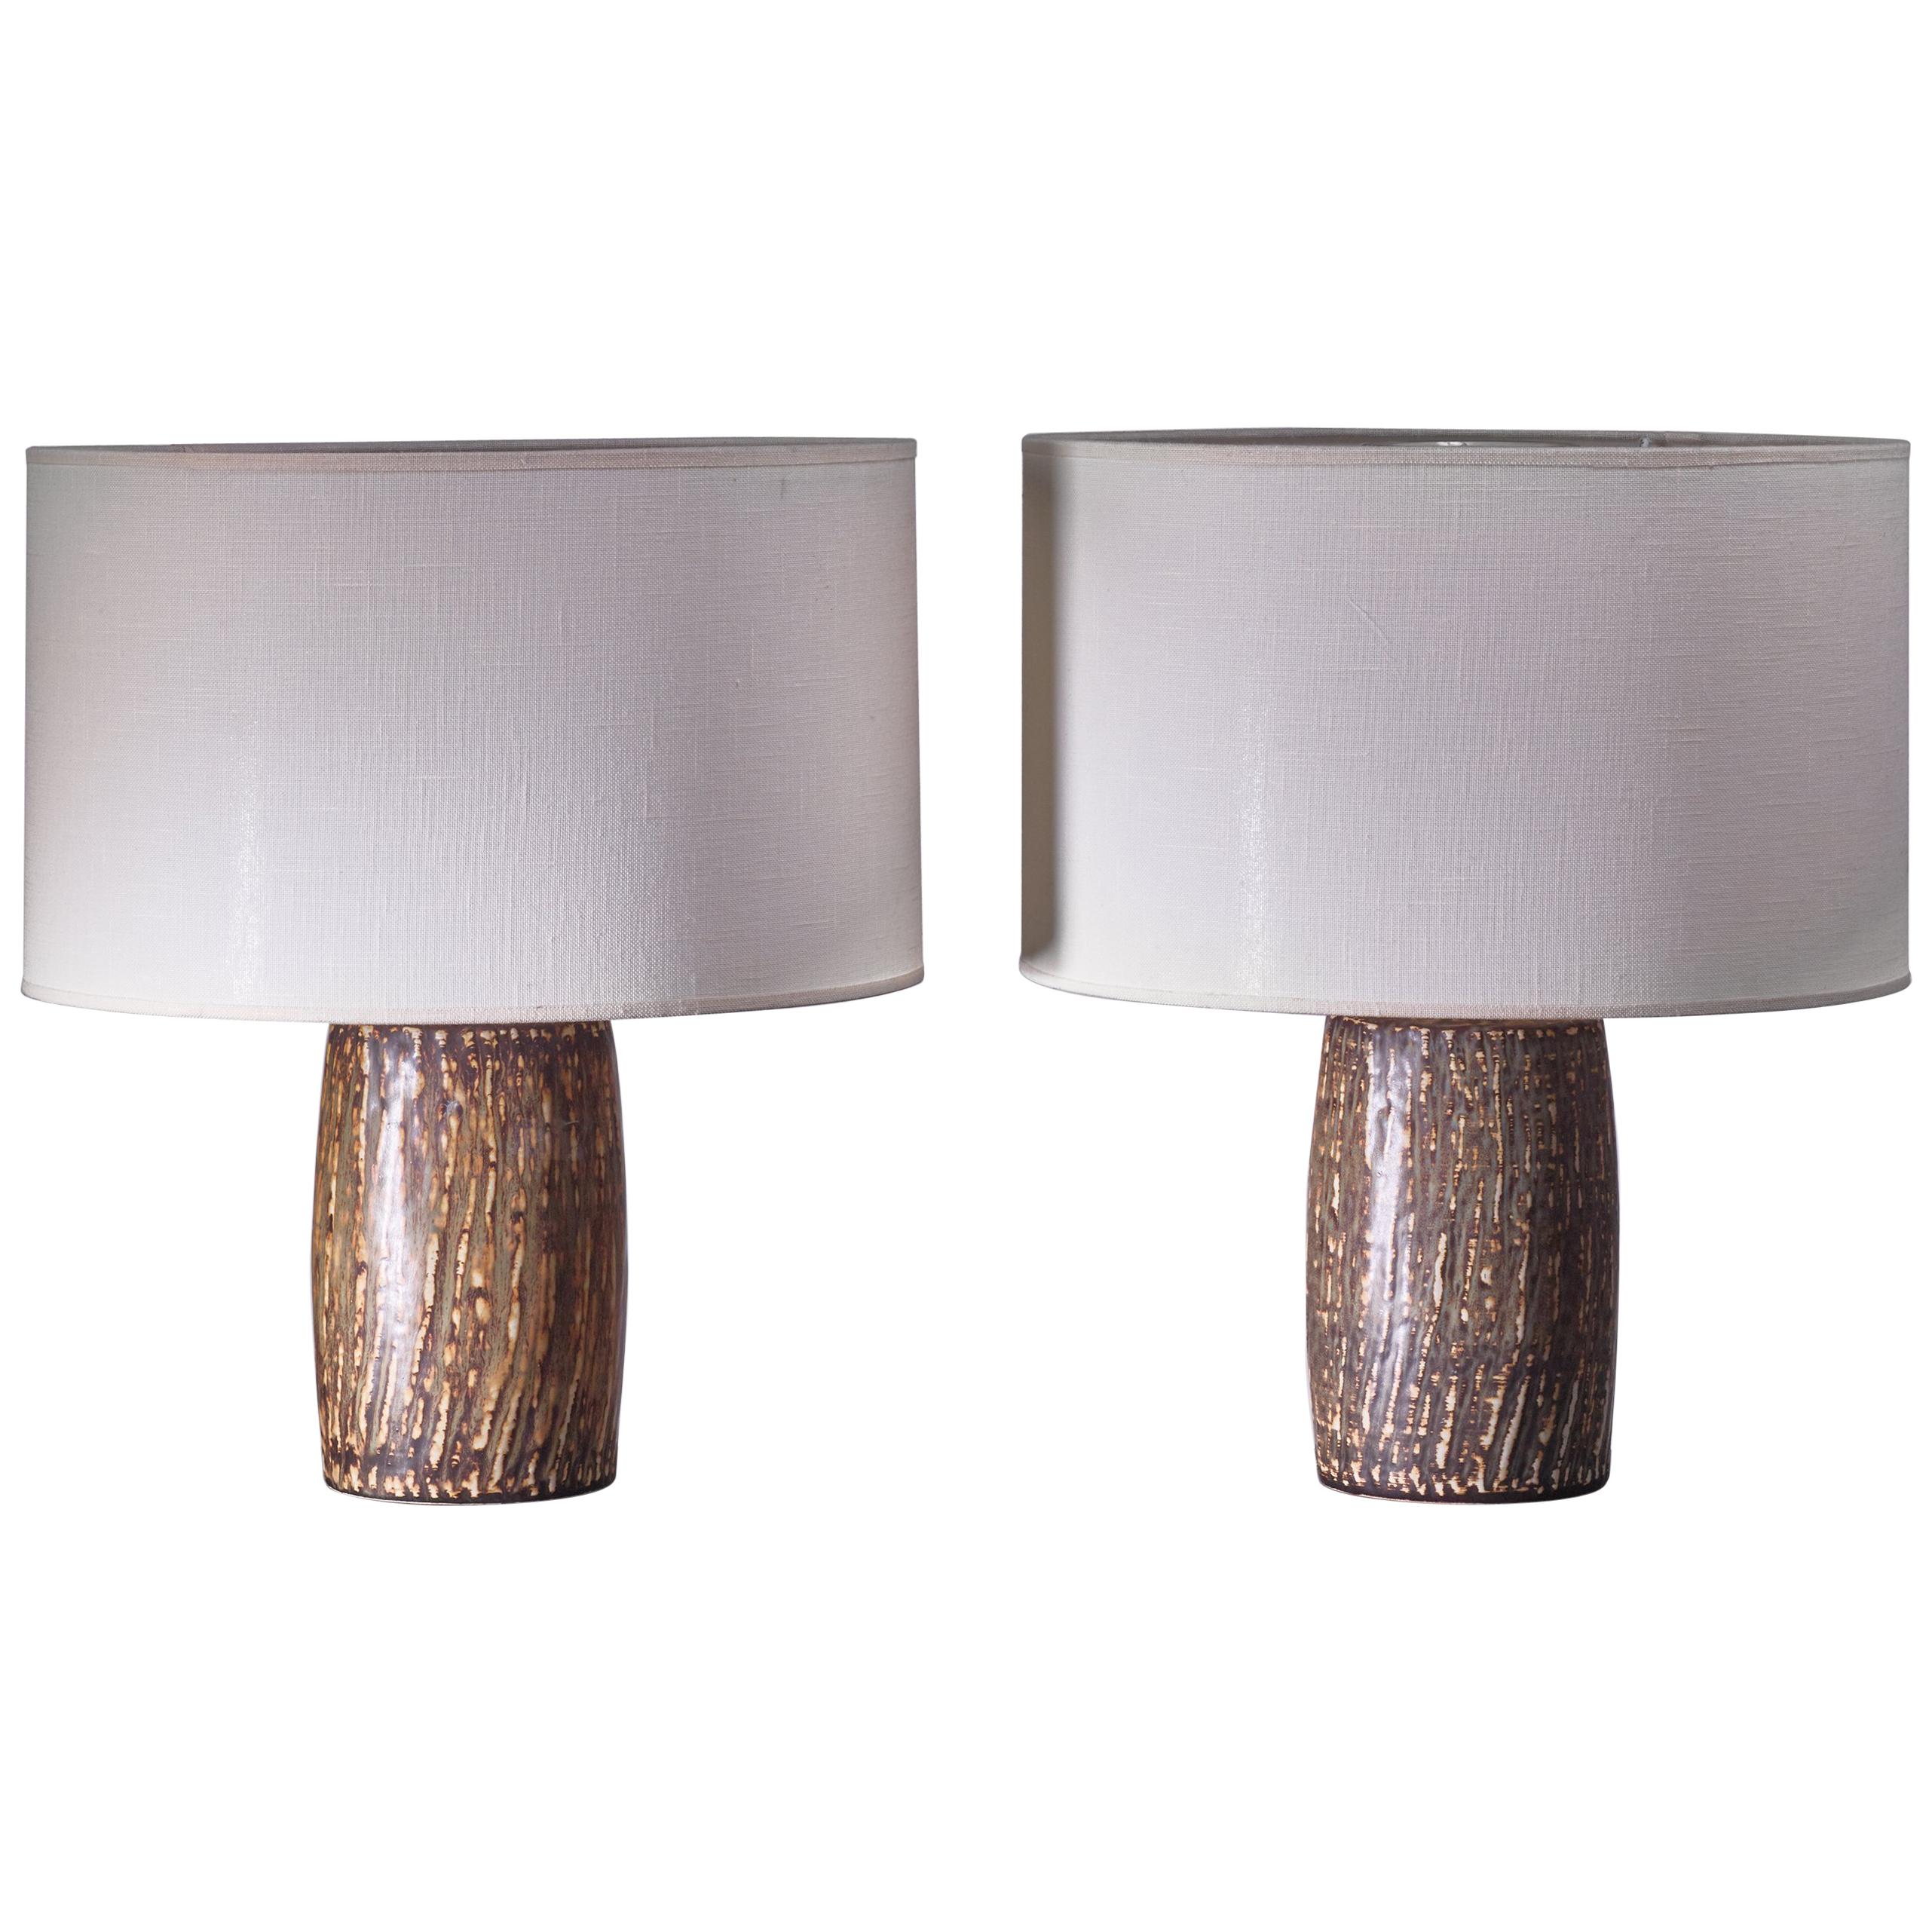 Pair of Gunnar Nylund Ceramic Table Lamps, Sweden, 1950s